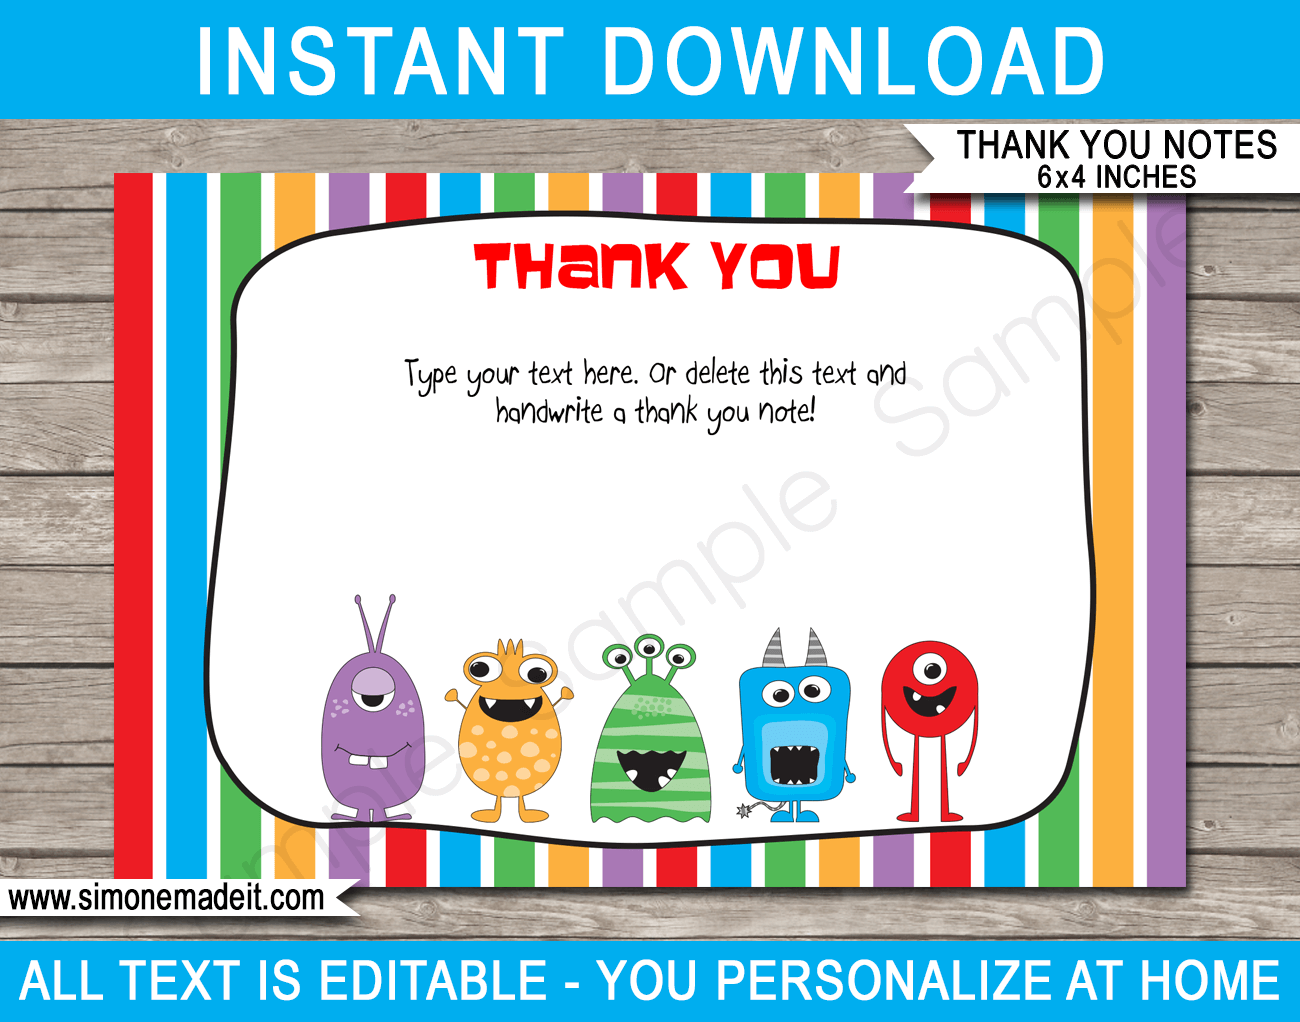 Printable Monster Thank You Cards Template - Monster Birthday Party theme - Editable Text - Instant Download via simonemadeit.com